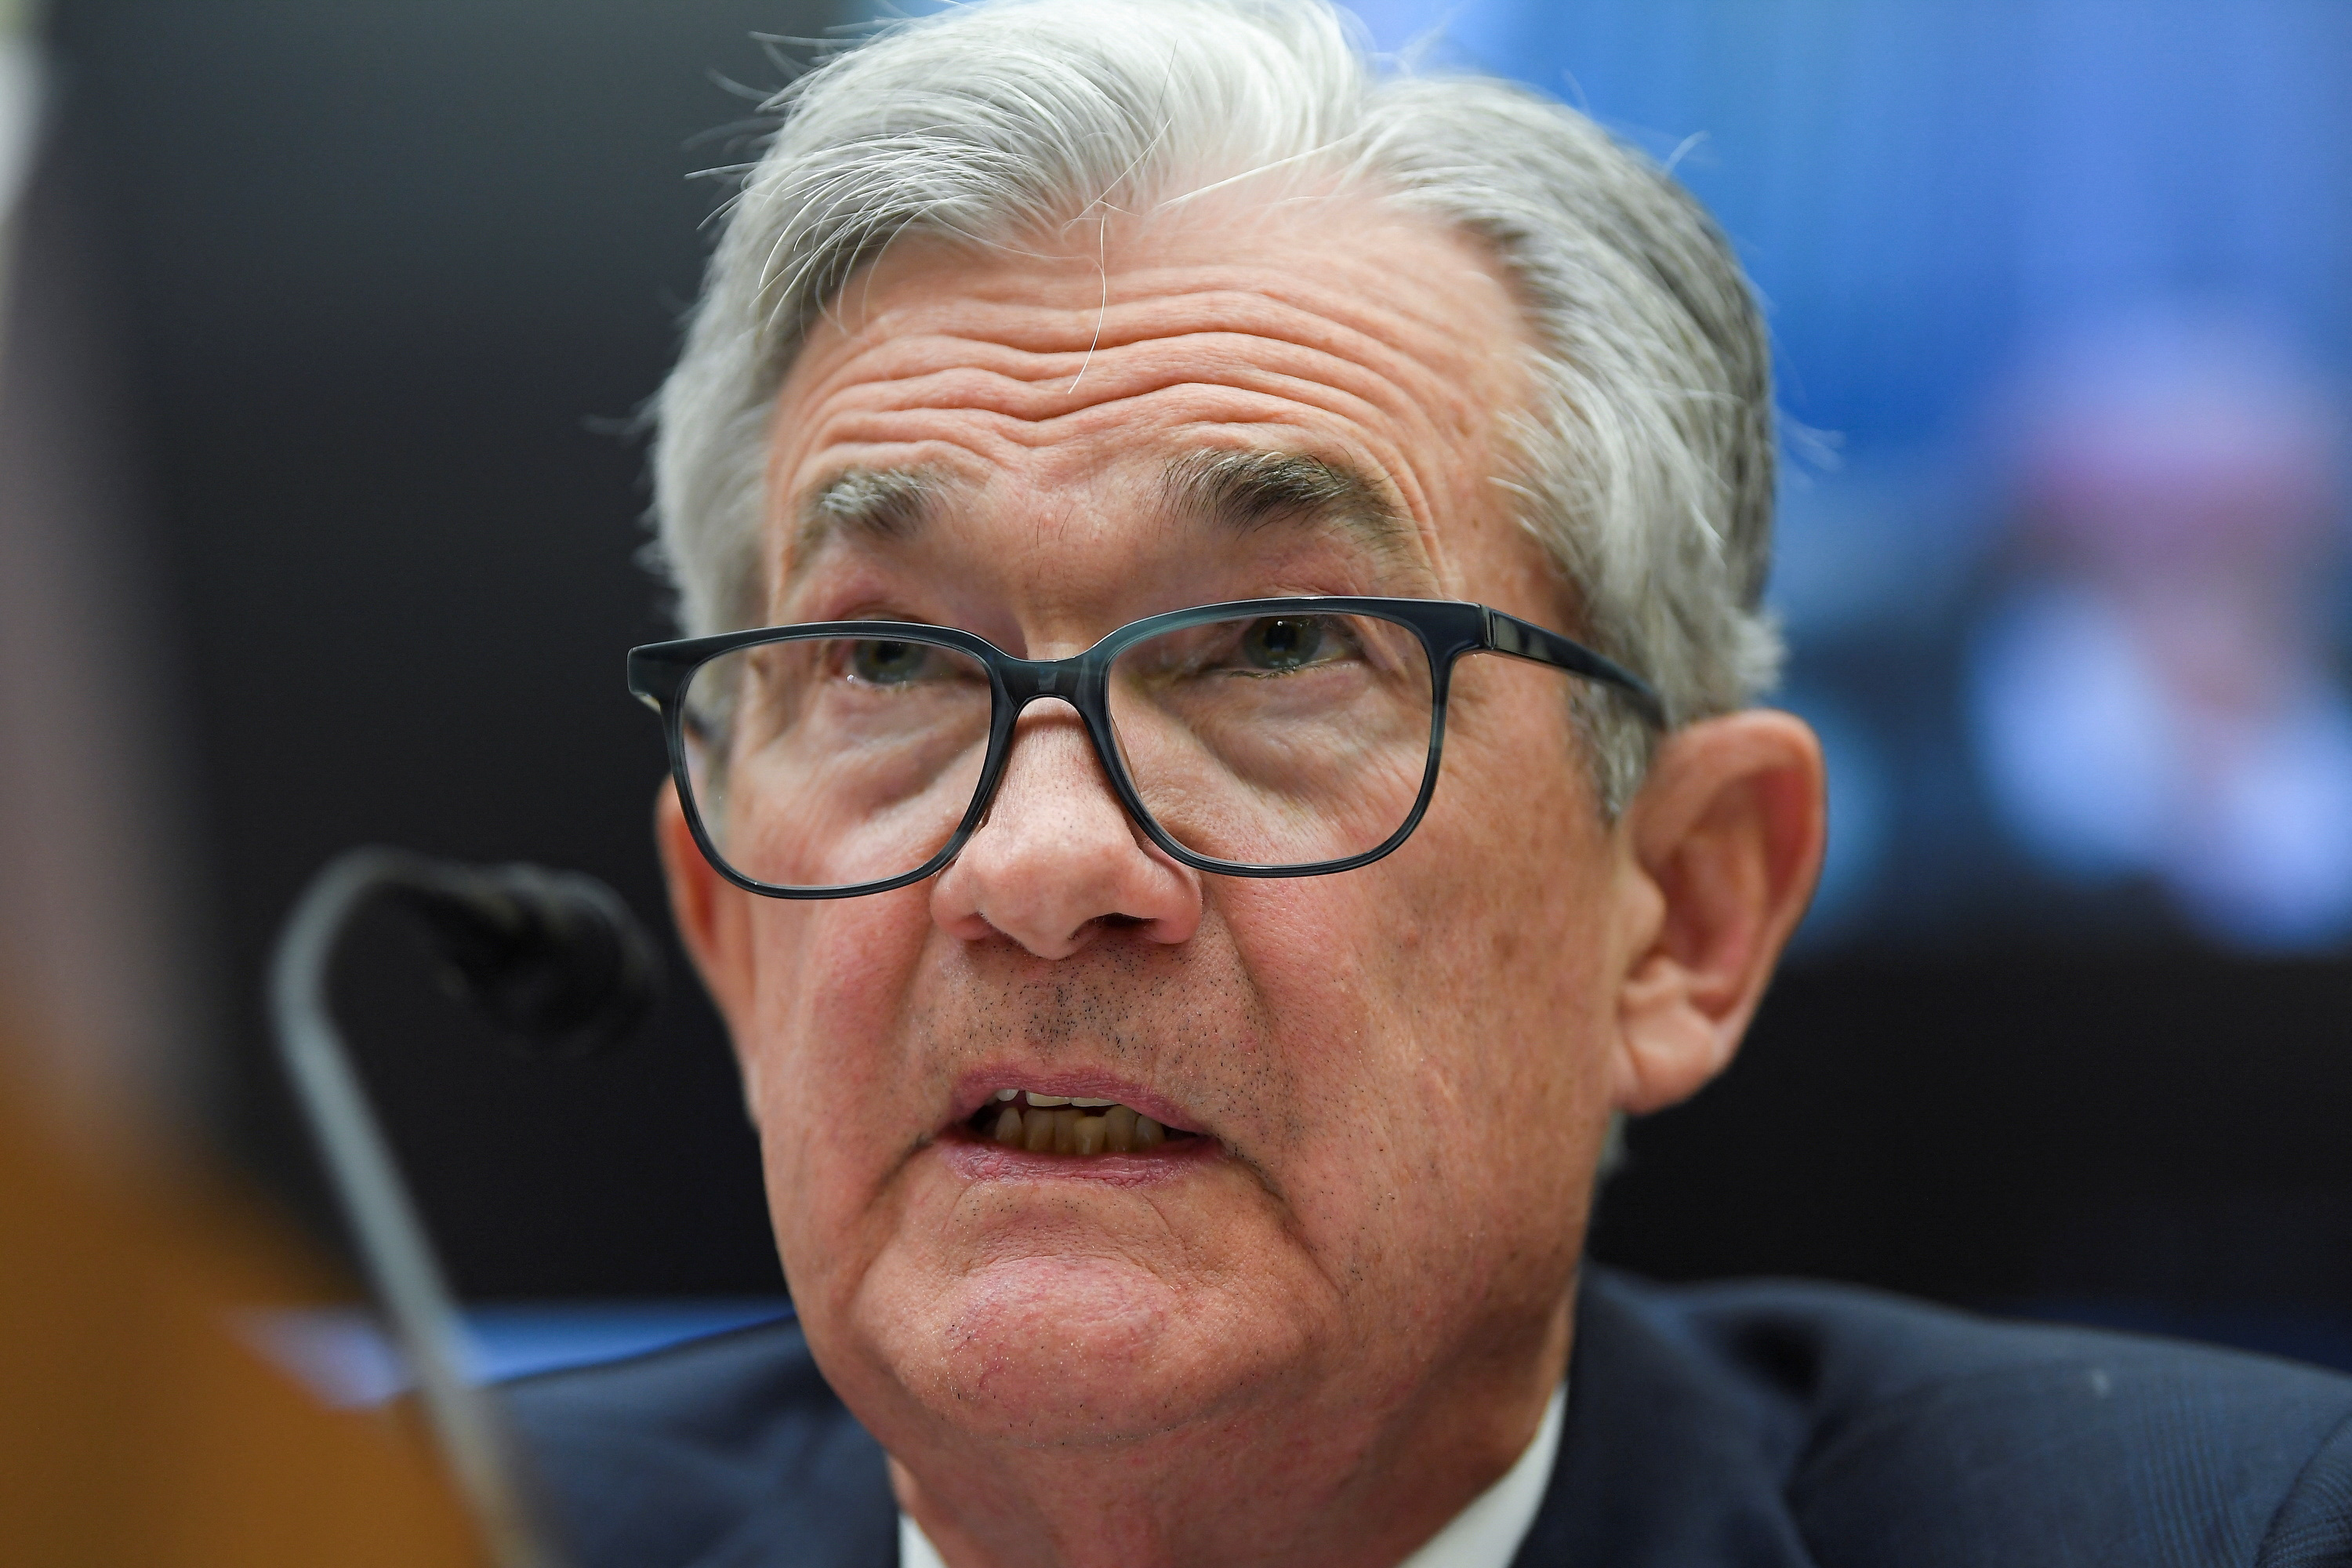 U.S. Federal Reserve Board Chair Jerome Powell testifies before a House Financial Services Committee hearing, in Washington